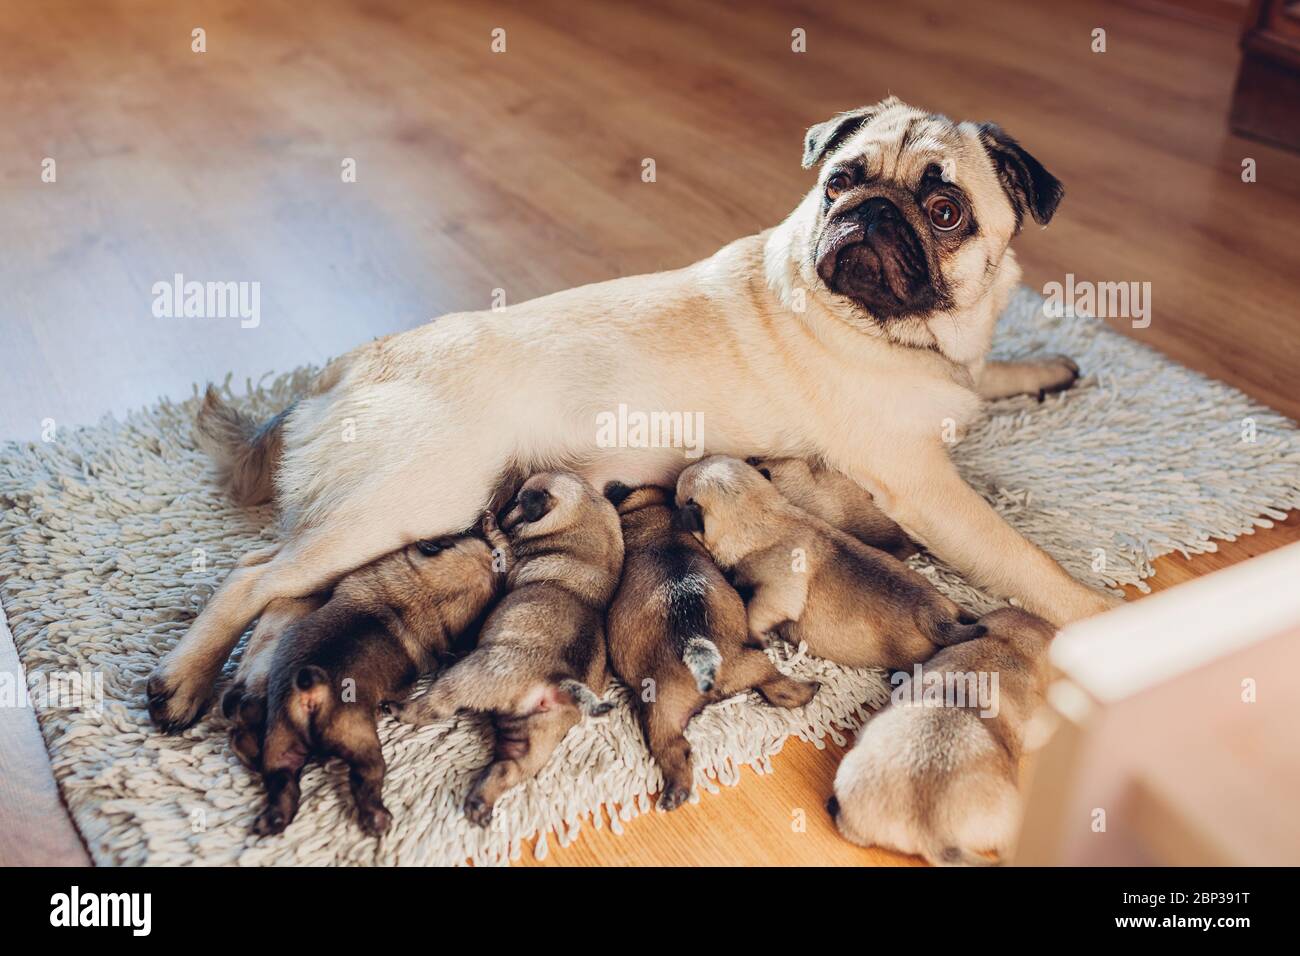 Pug dog mother feeding six puppies at home. Dog lying on carpet with kids.  Family time Stock Photo - Alamy